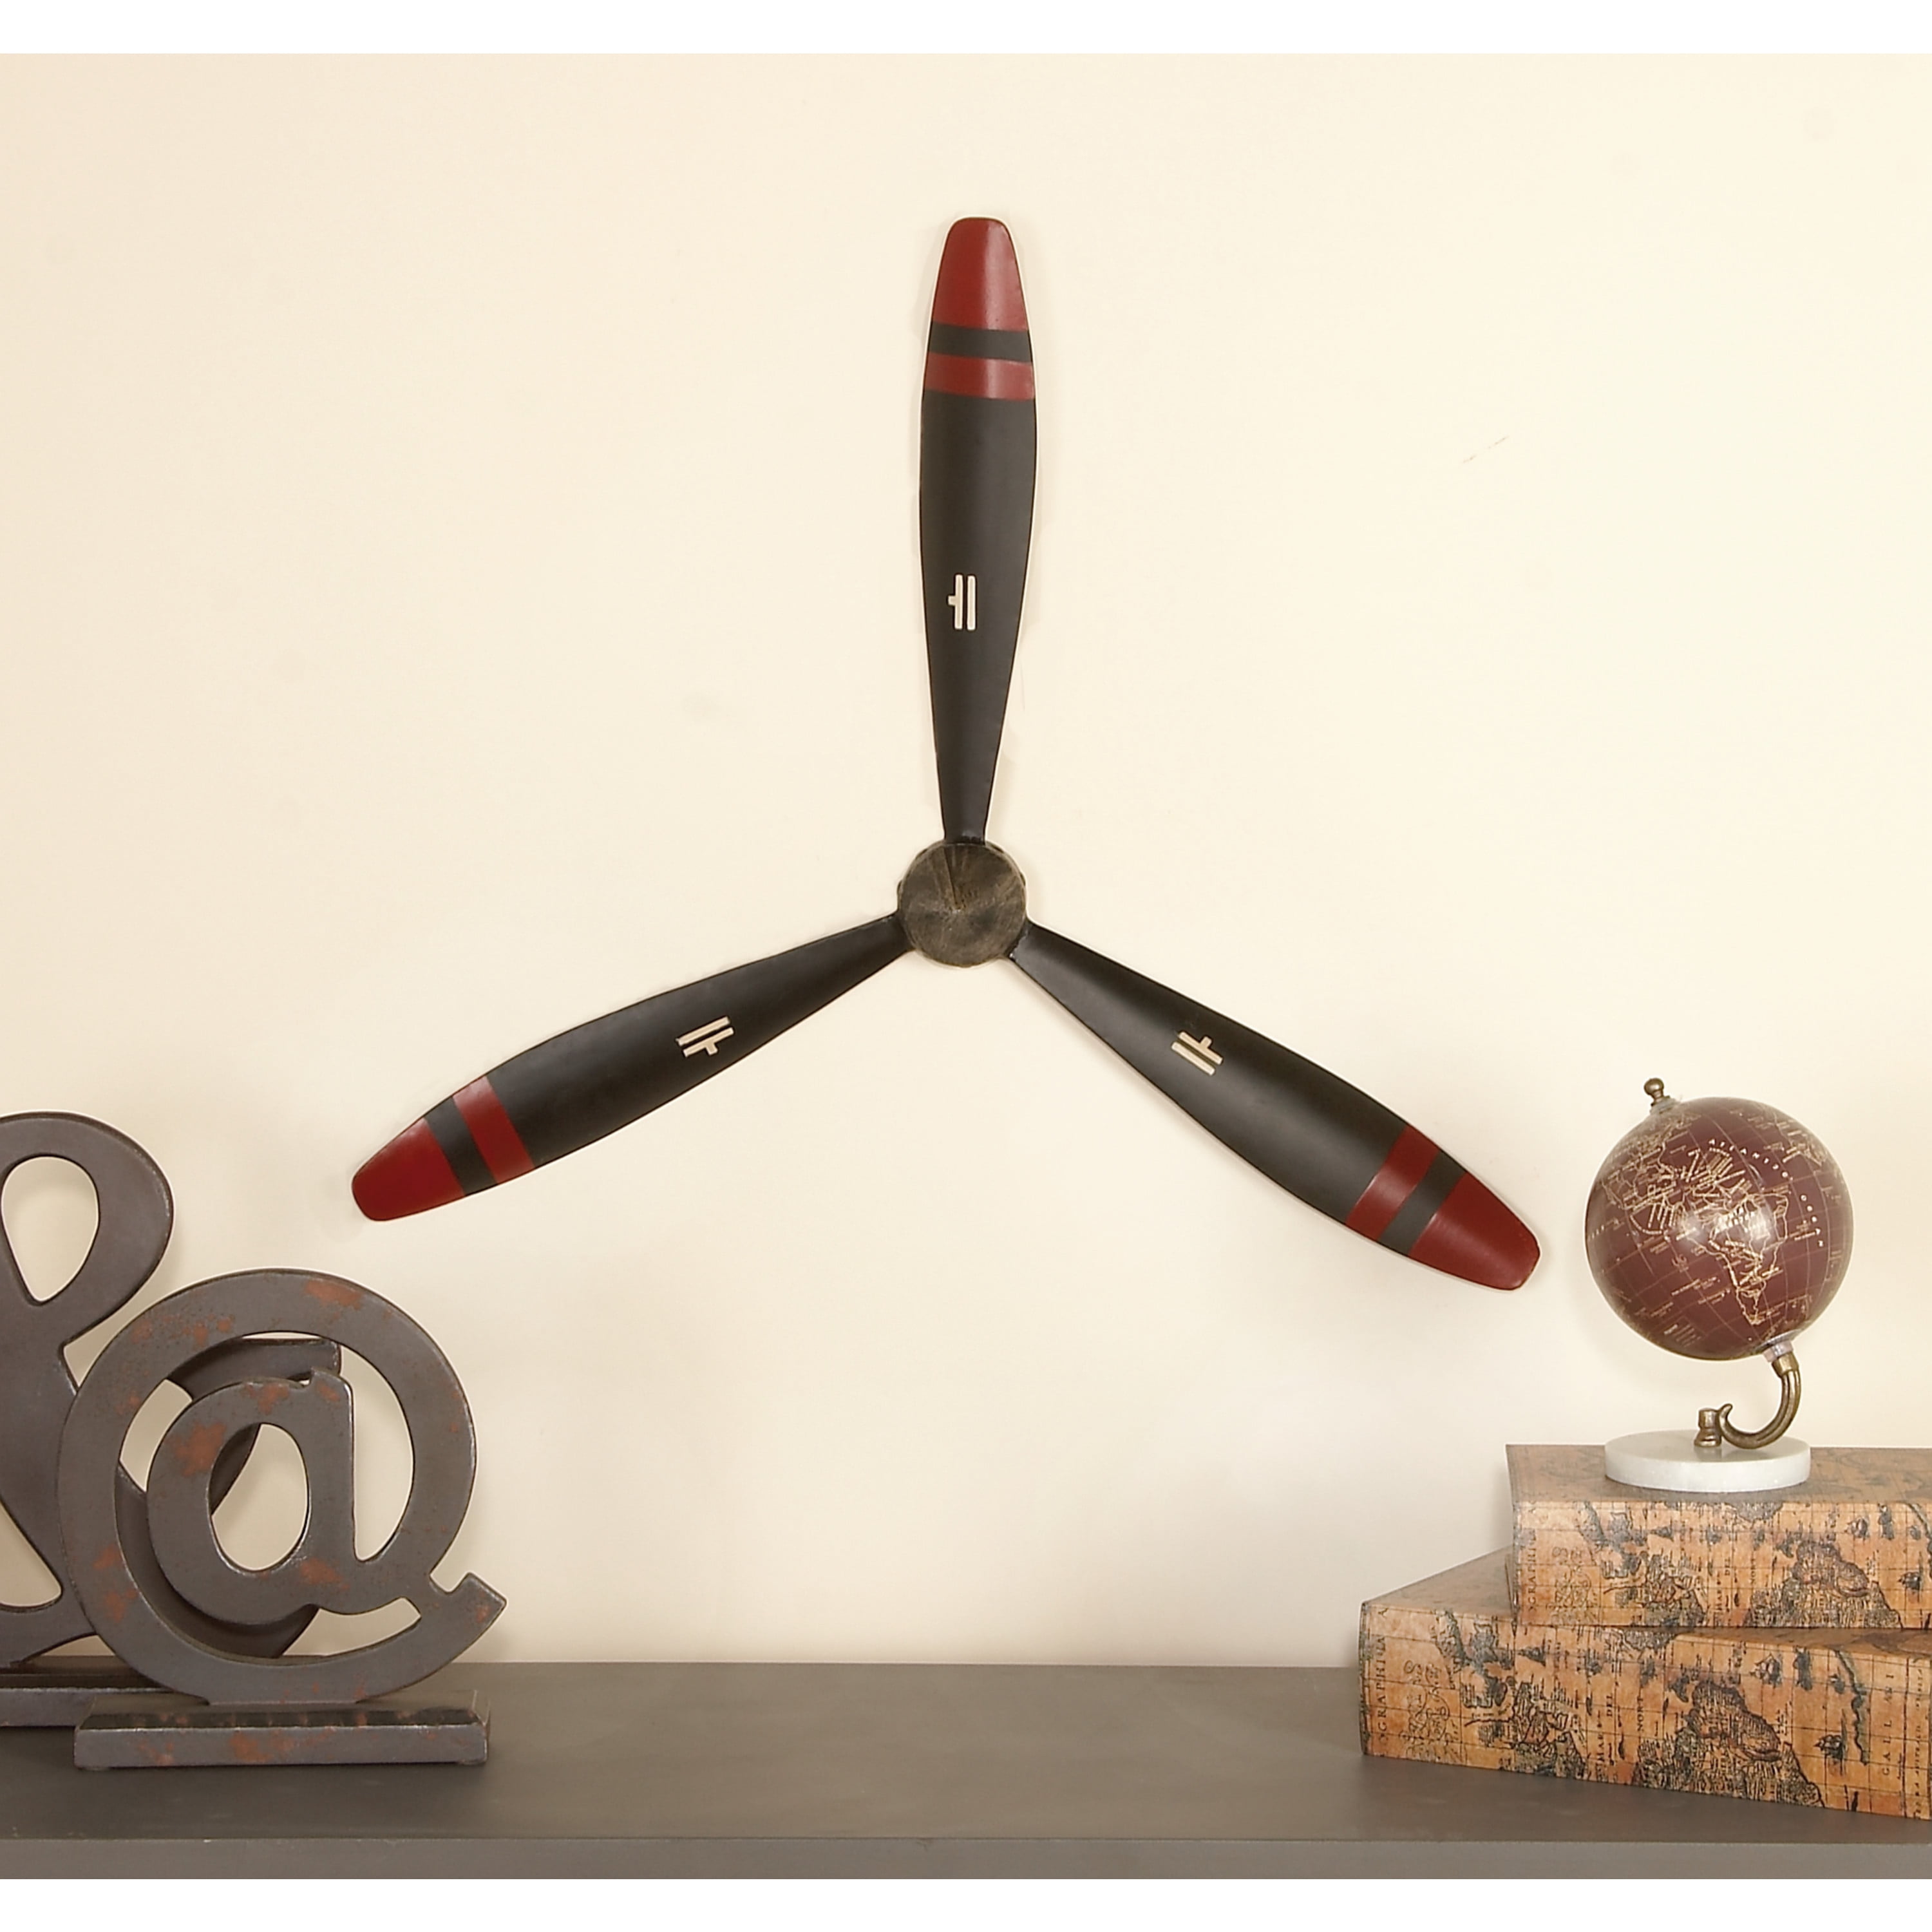 YOUKI Metal Airplane Propeller Wall Art Home Decor Kitchen Wall Sculptures Battery Operated Wall Sculptures Black 